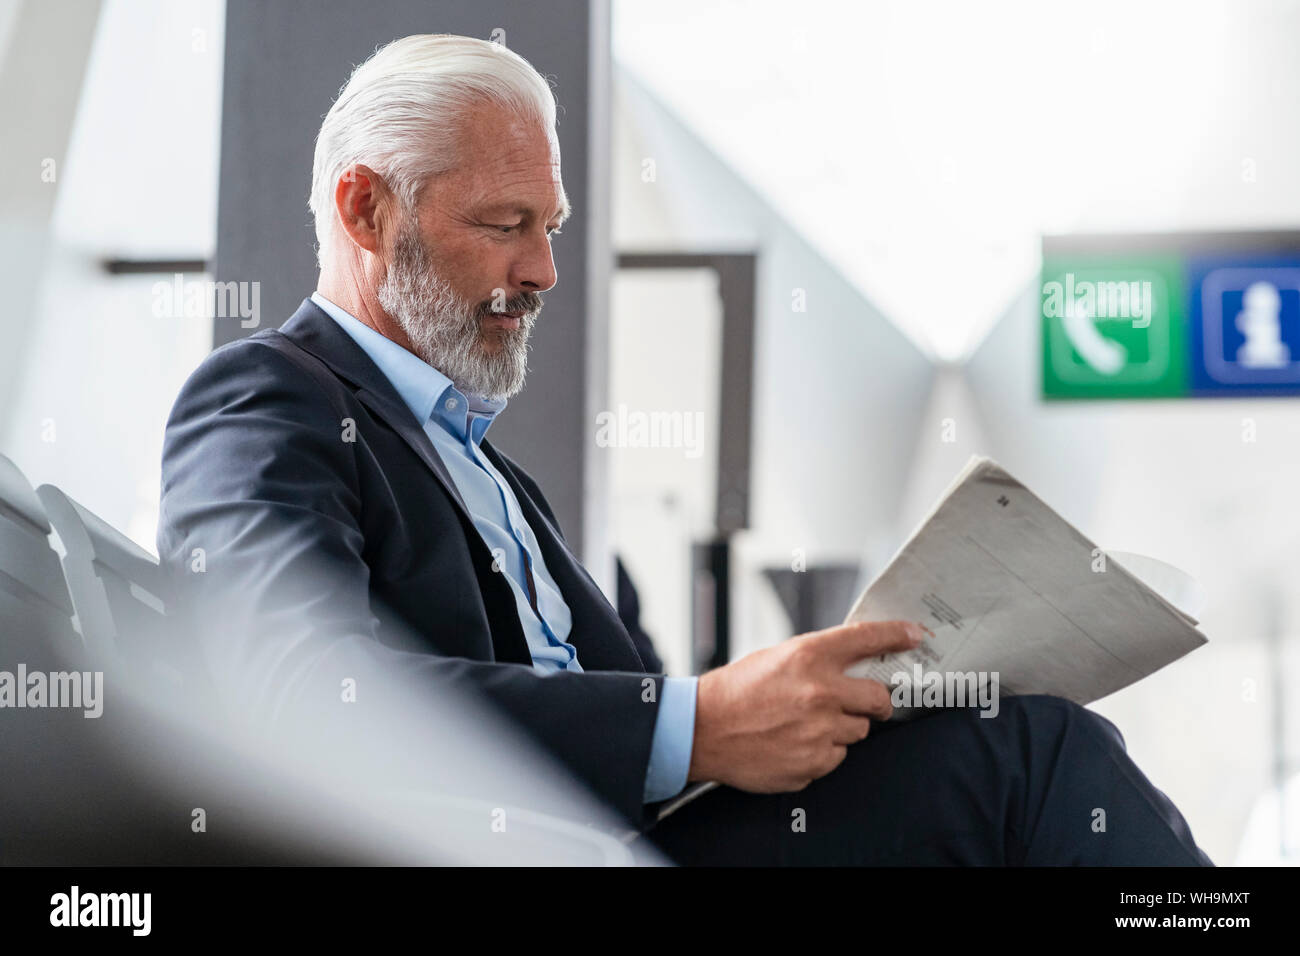 Mature businessman sitting in waiting area reading newspaper Stock Photo